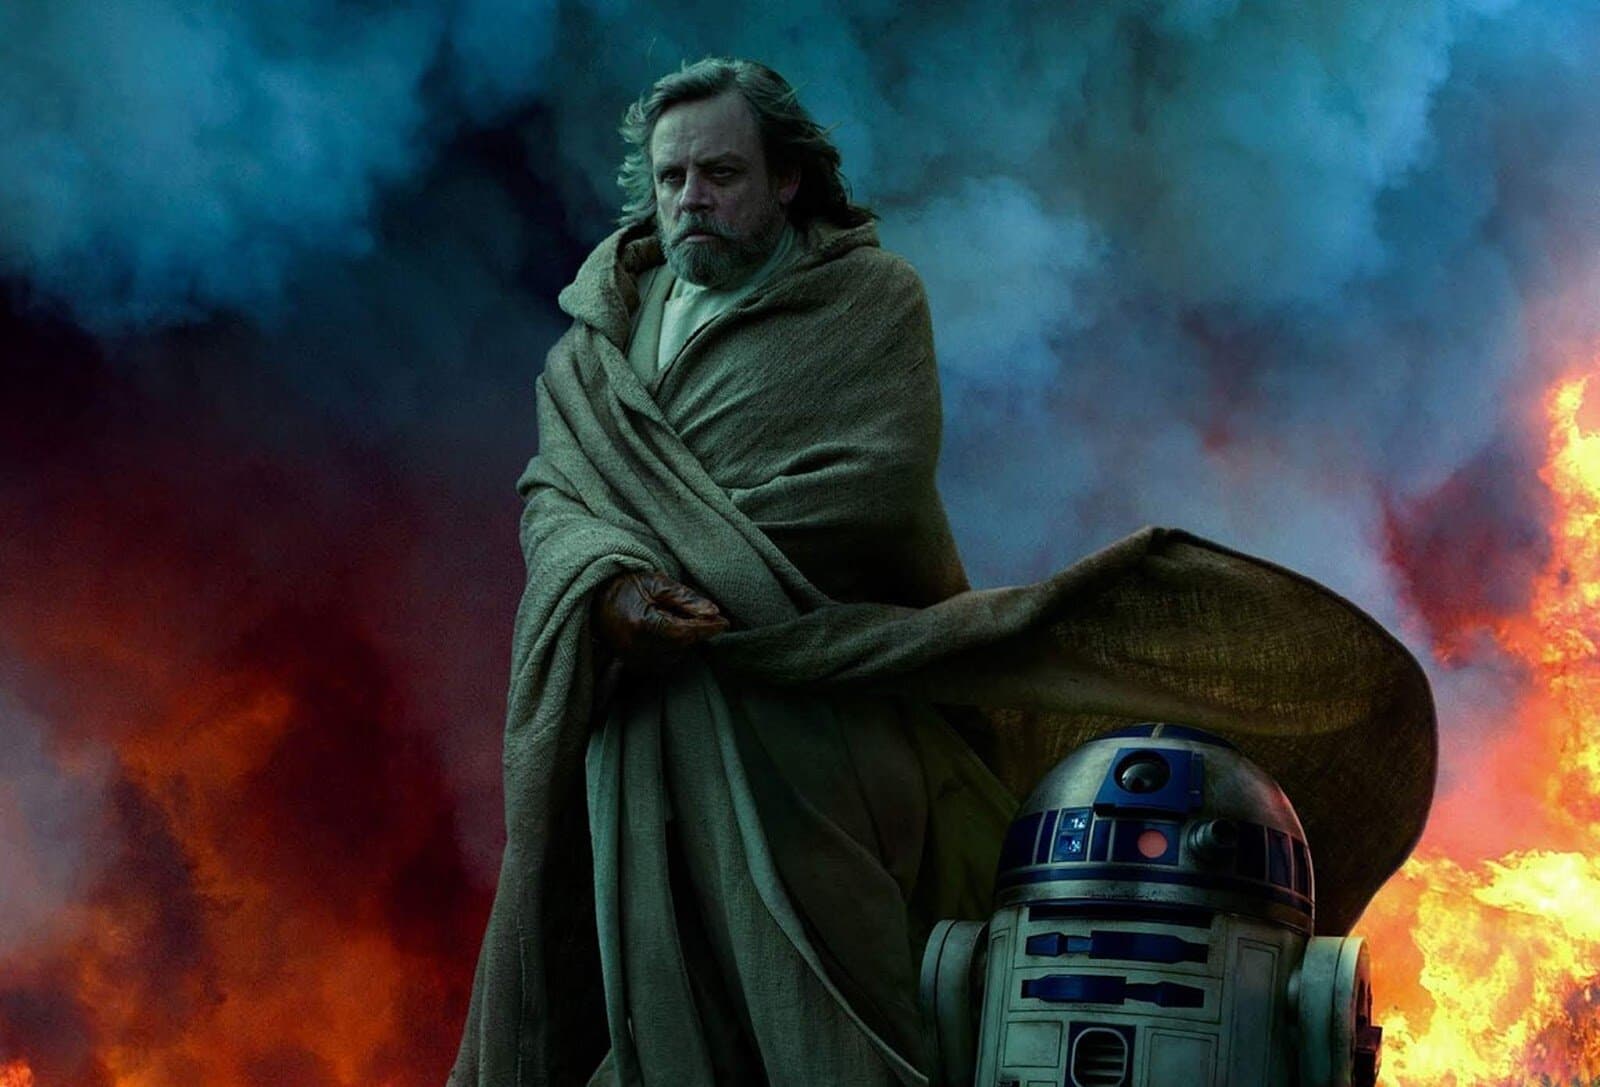 It's not easy to dupe Mark Hamill, he has his force or fans to protect him. Pic courtesy: Forbes.com